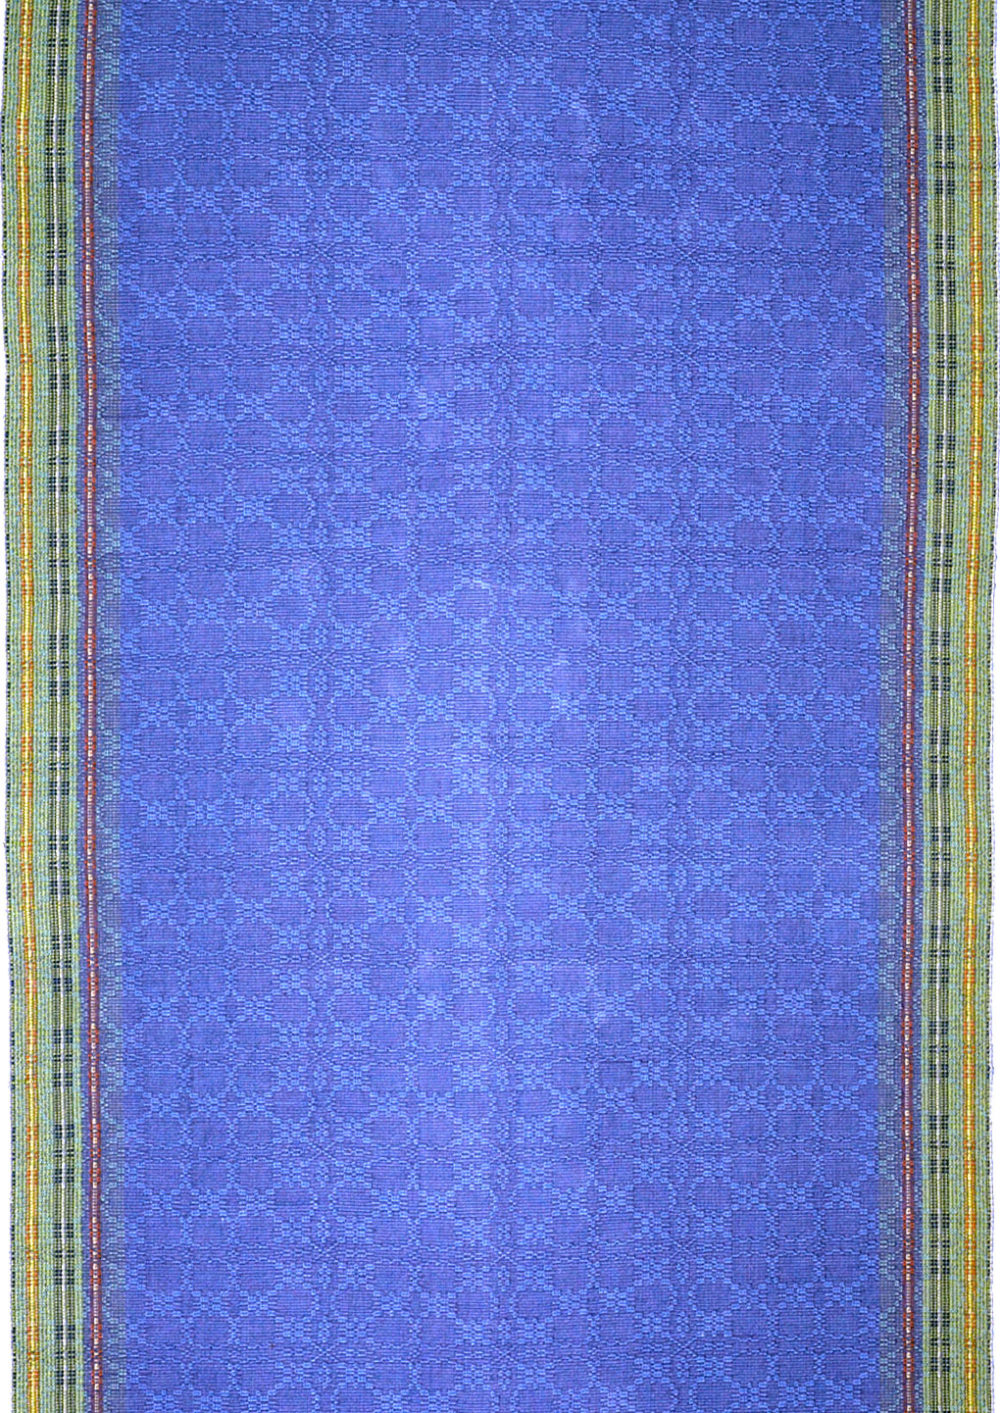 handwoven cotton throw Scandinavian design periwinkle and lime